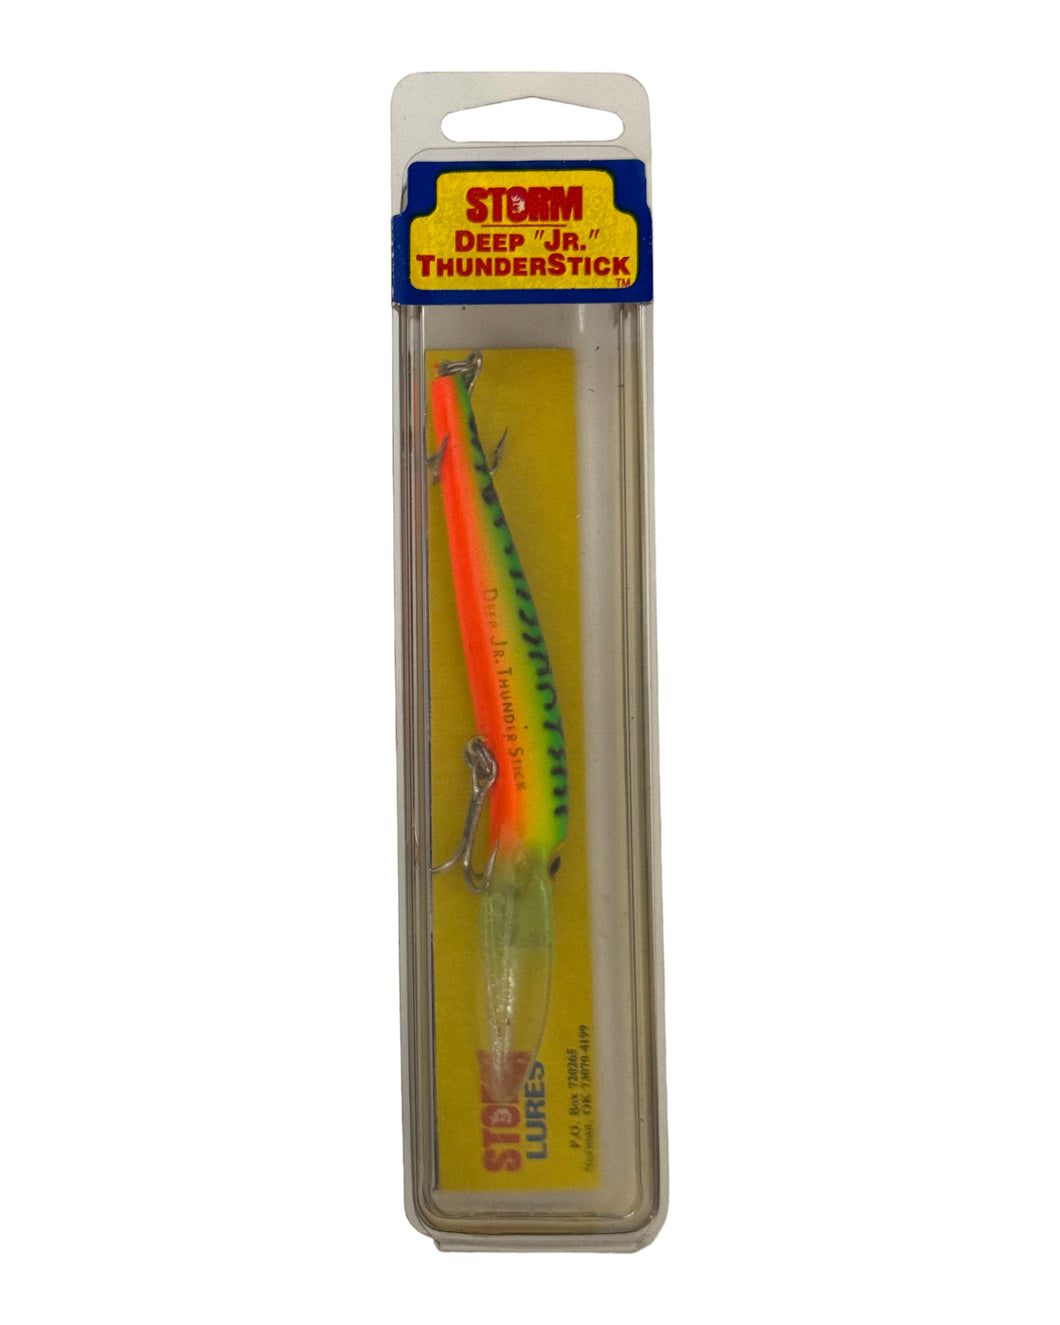 STORM LURES Deep Jr Thunderstick Fishing Lure • HOT TIGER – Toad